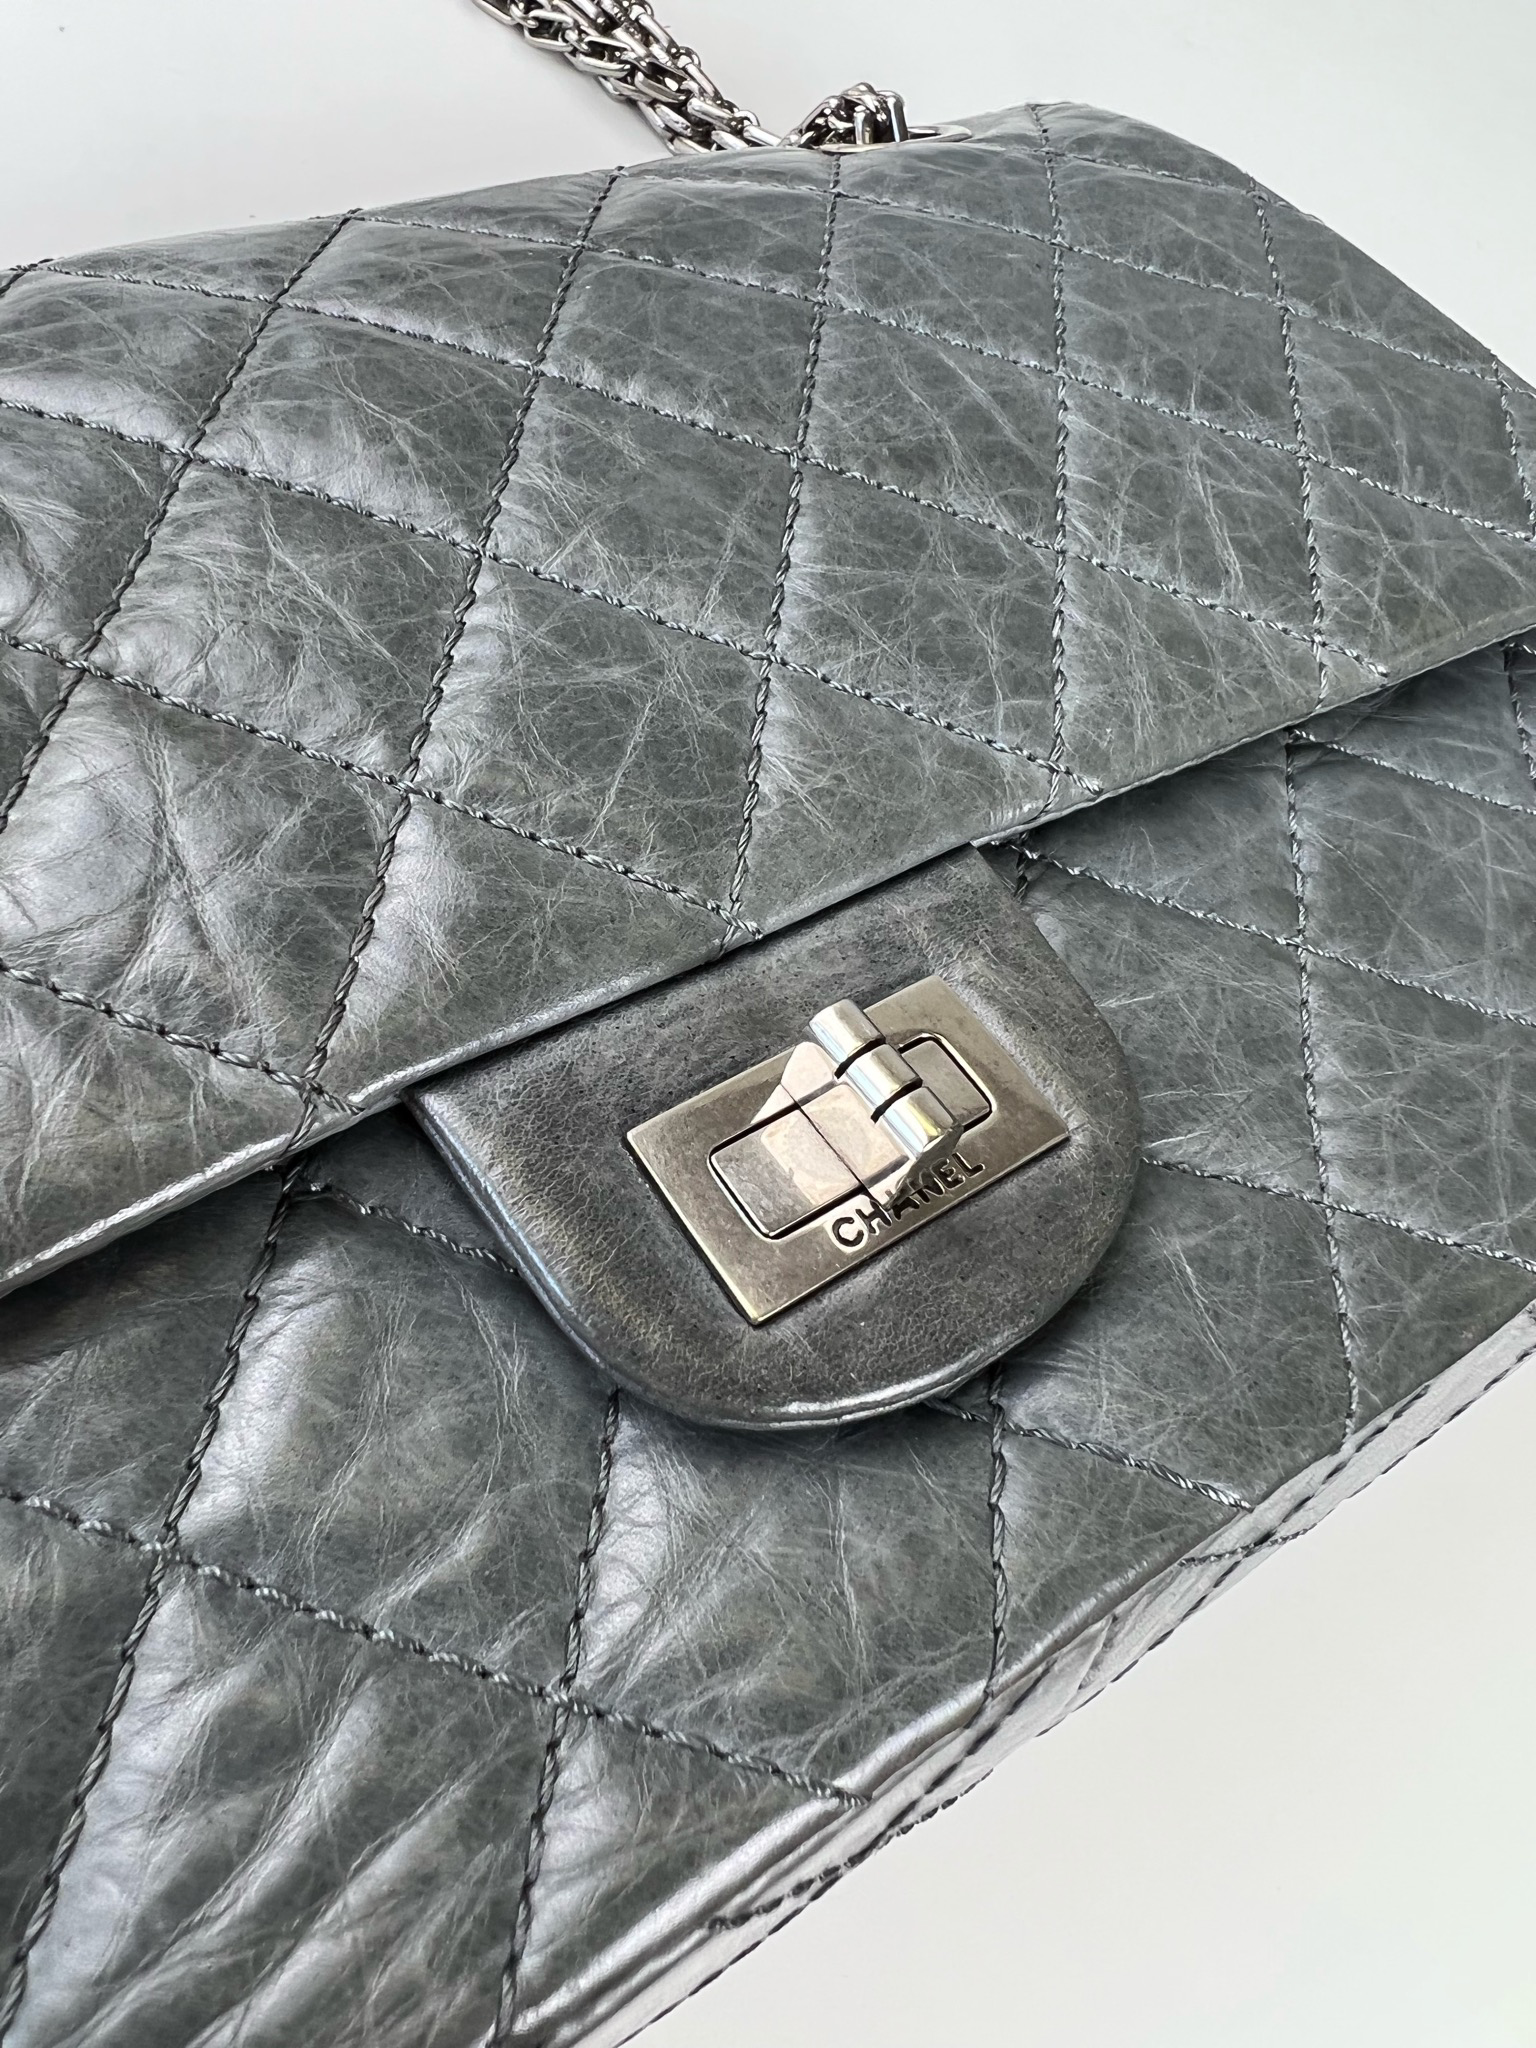 CHANEL Women's Bags & Lambskin Lining, Authenticity Guaranteed